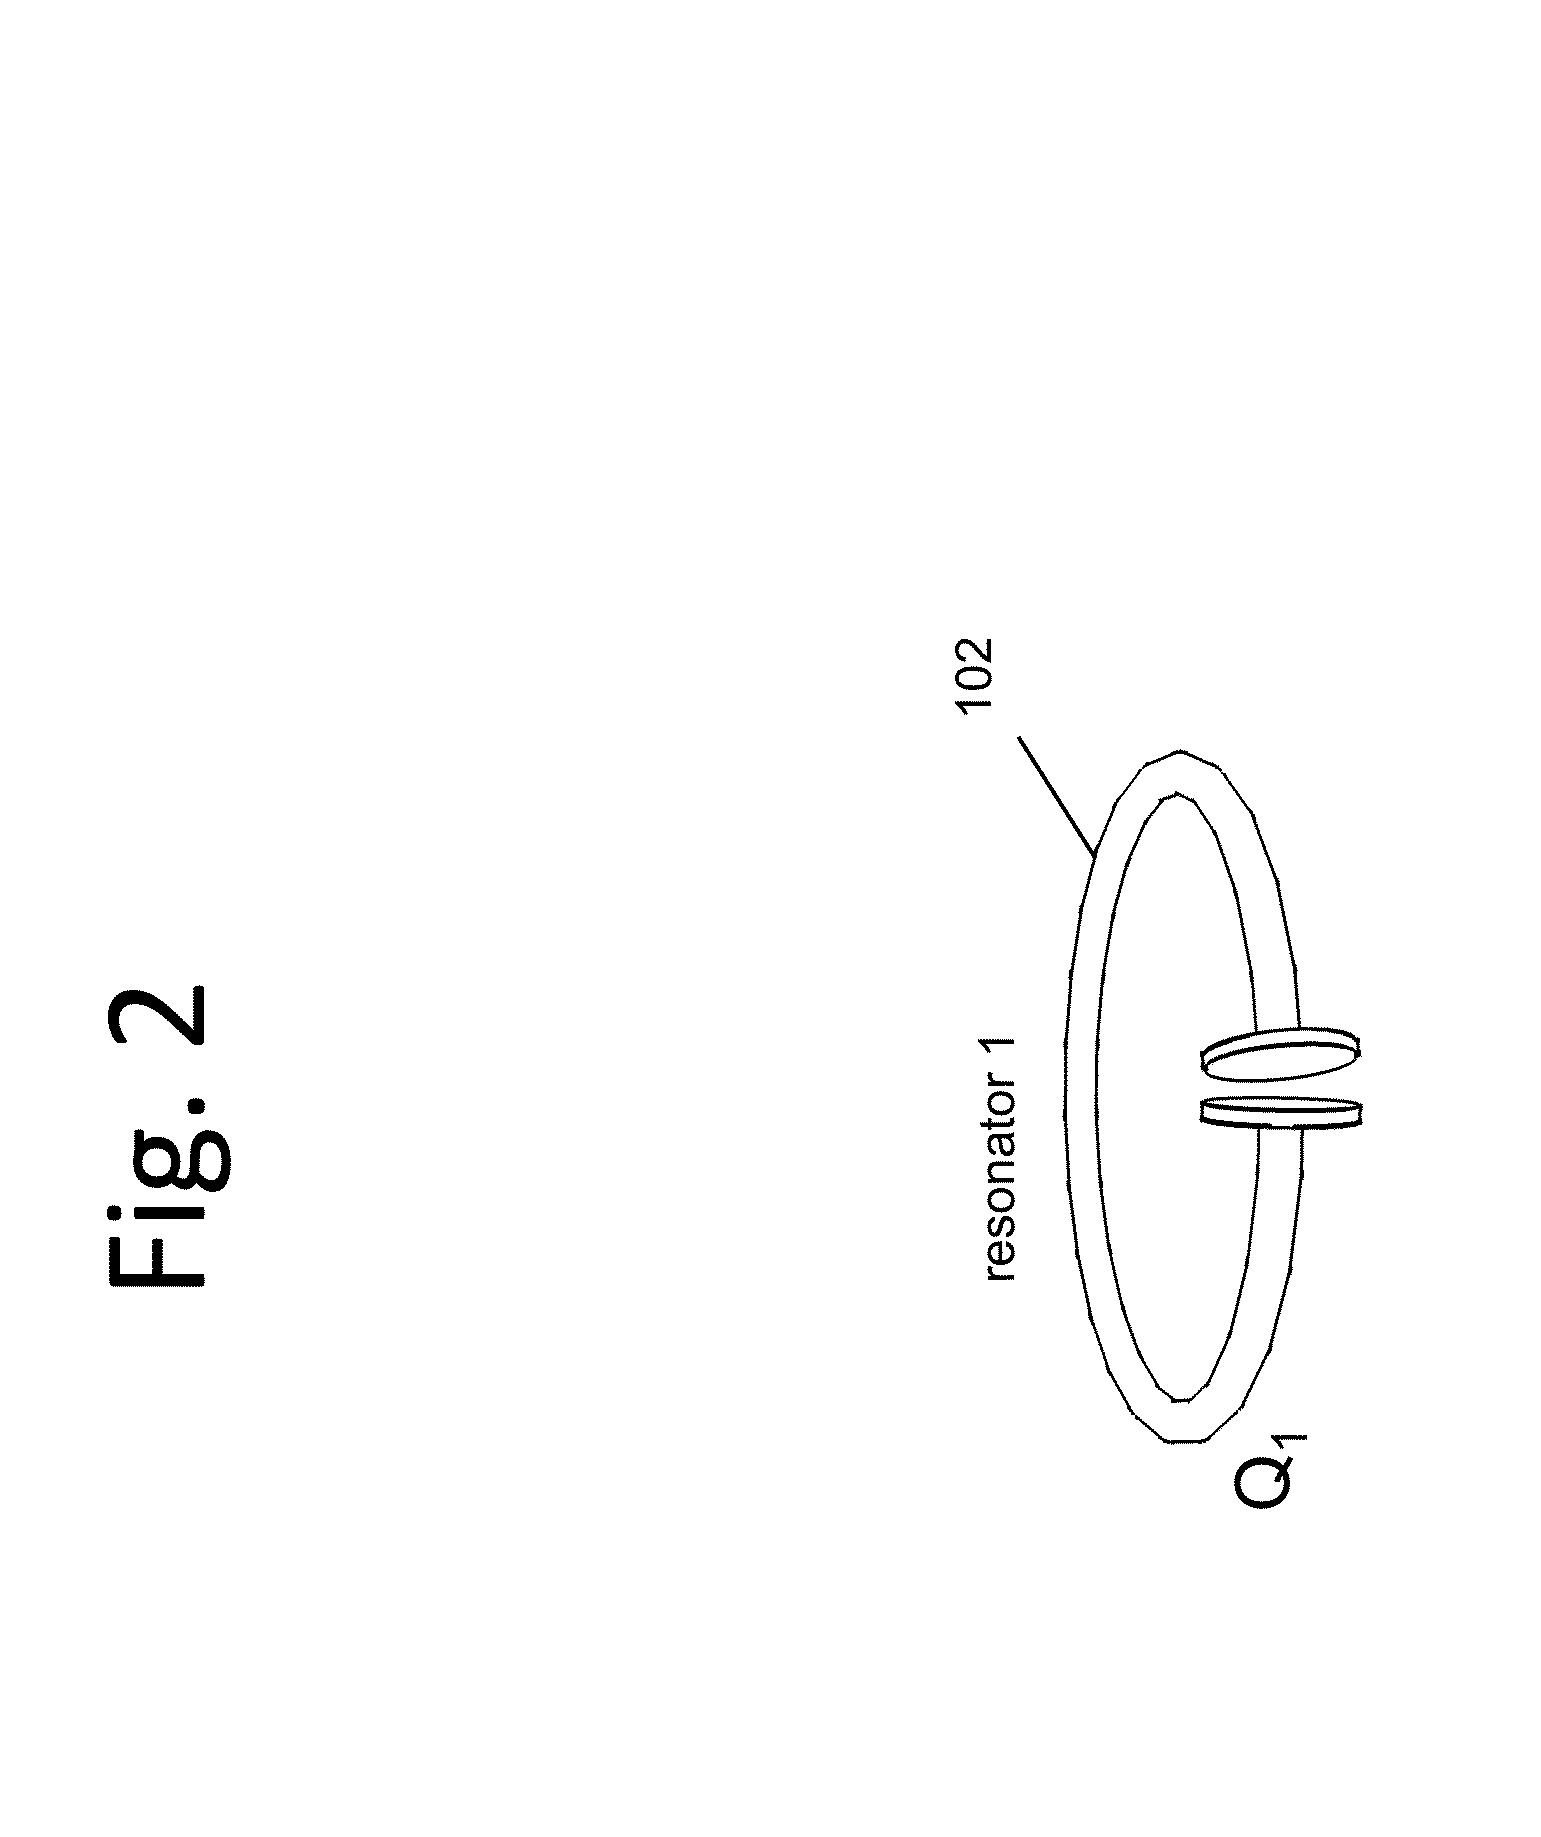 Series relayed wireless power transfer in a vehicle